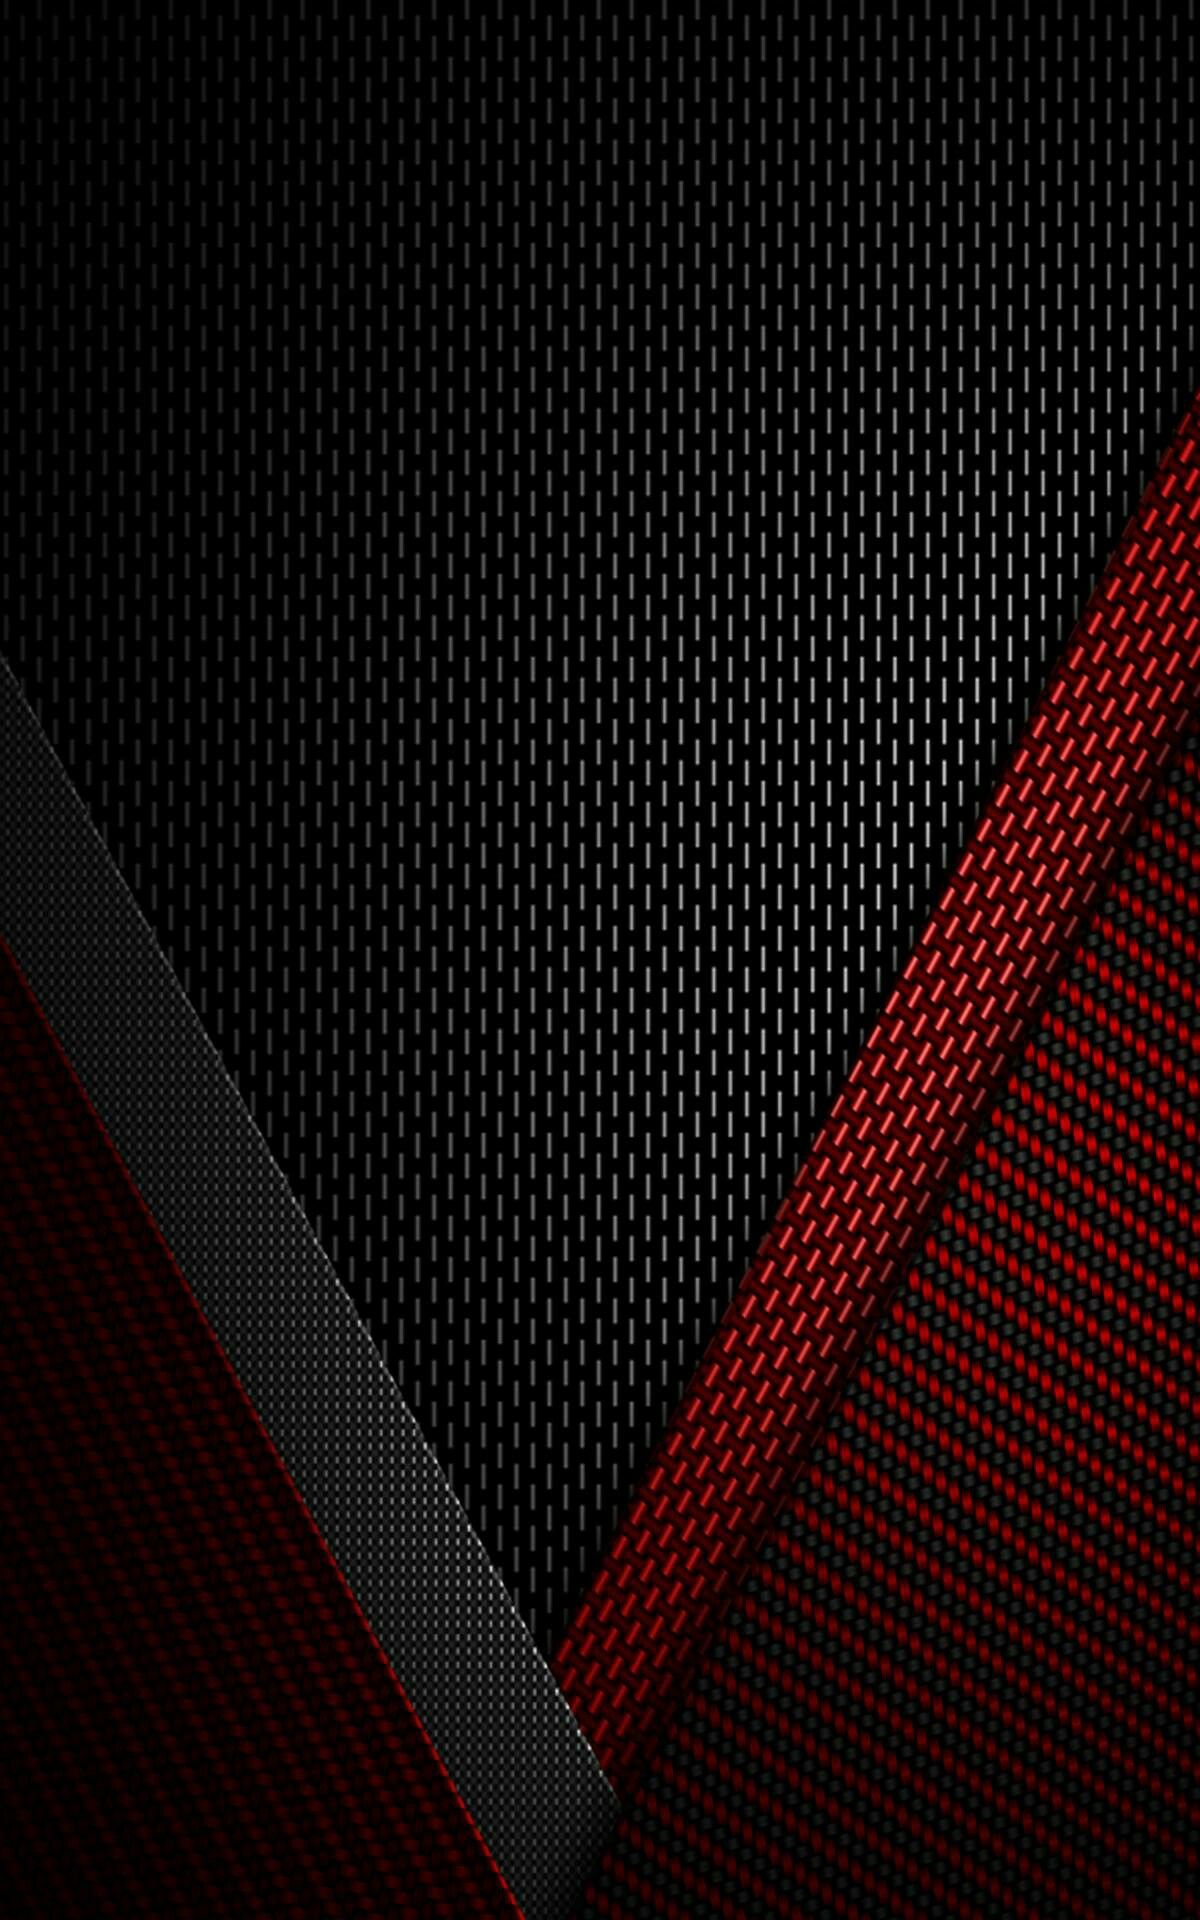 Iphone X Wallpaper Red And Black - HD Wallpaper 